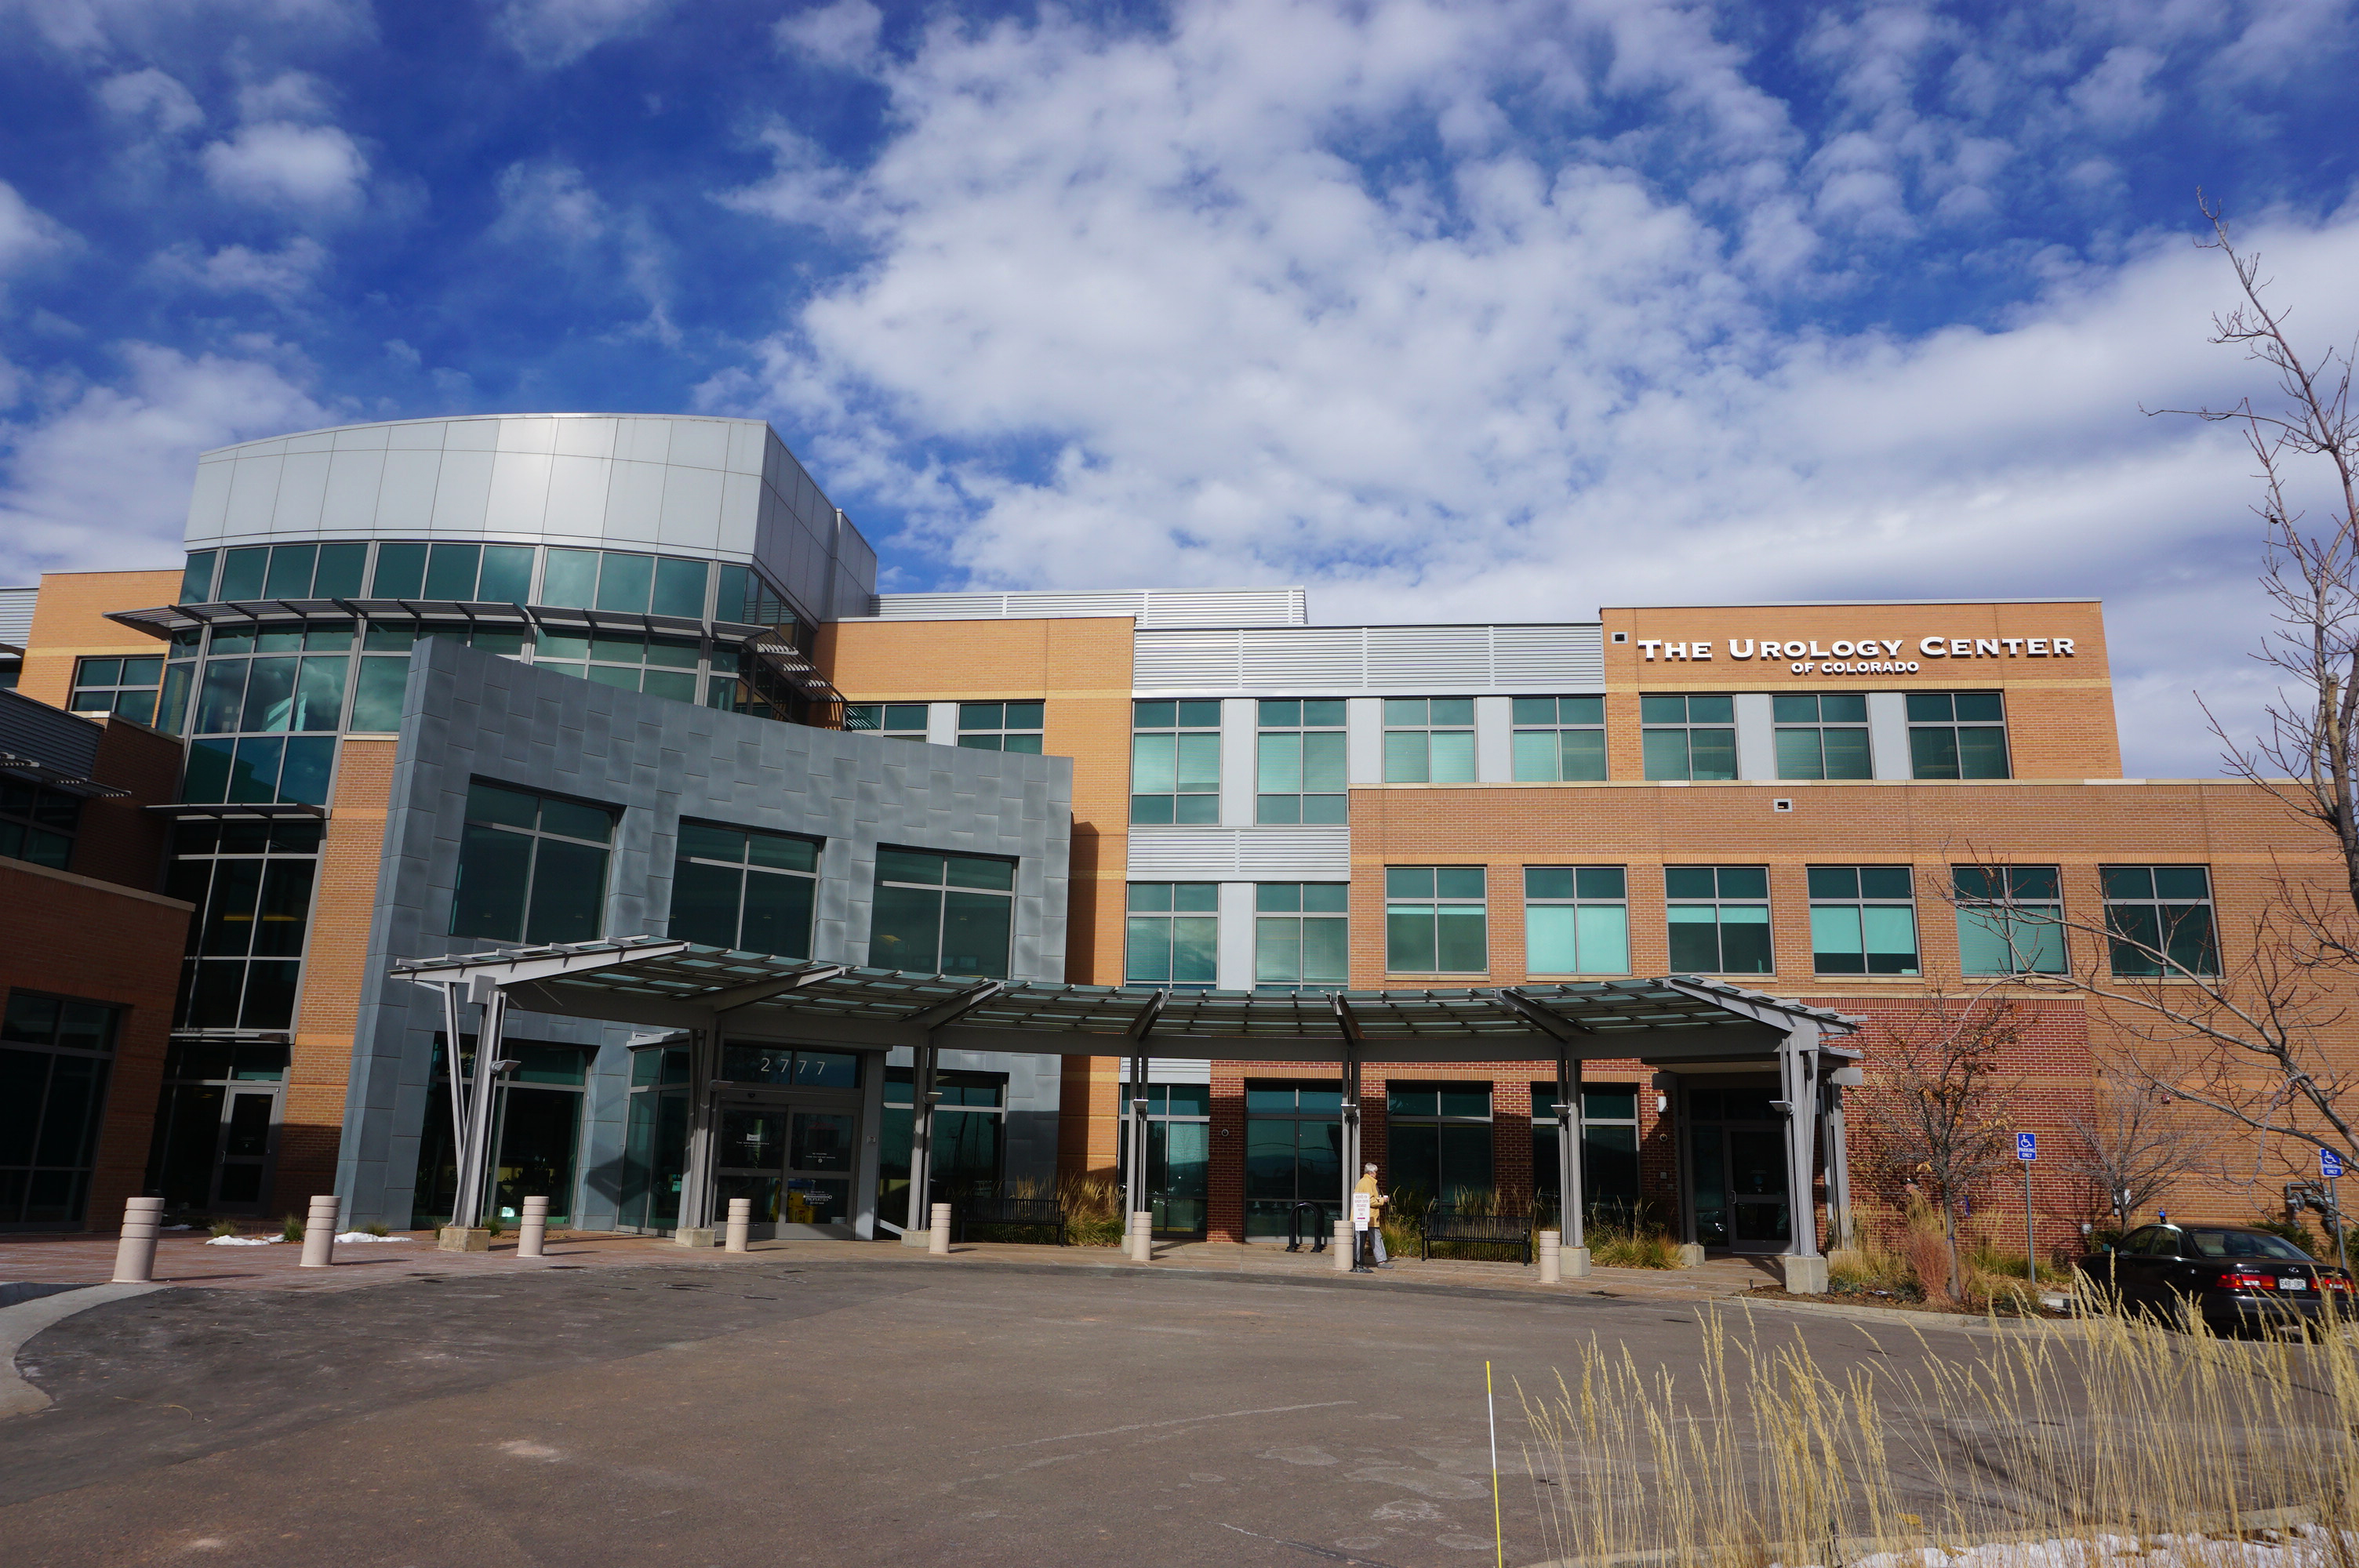 The Urology Center of Colorado has been sold off. Photo by George Demopoulos.